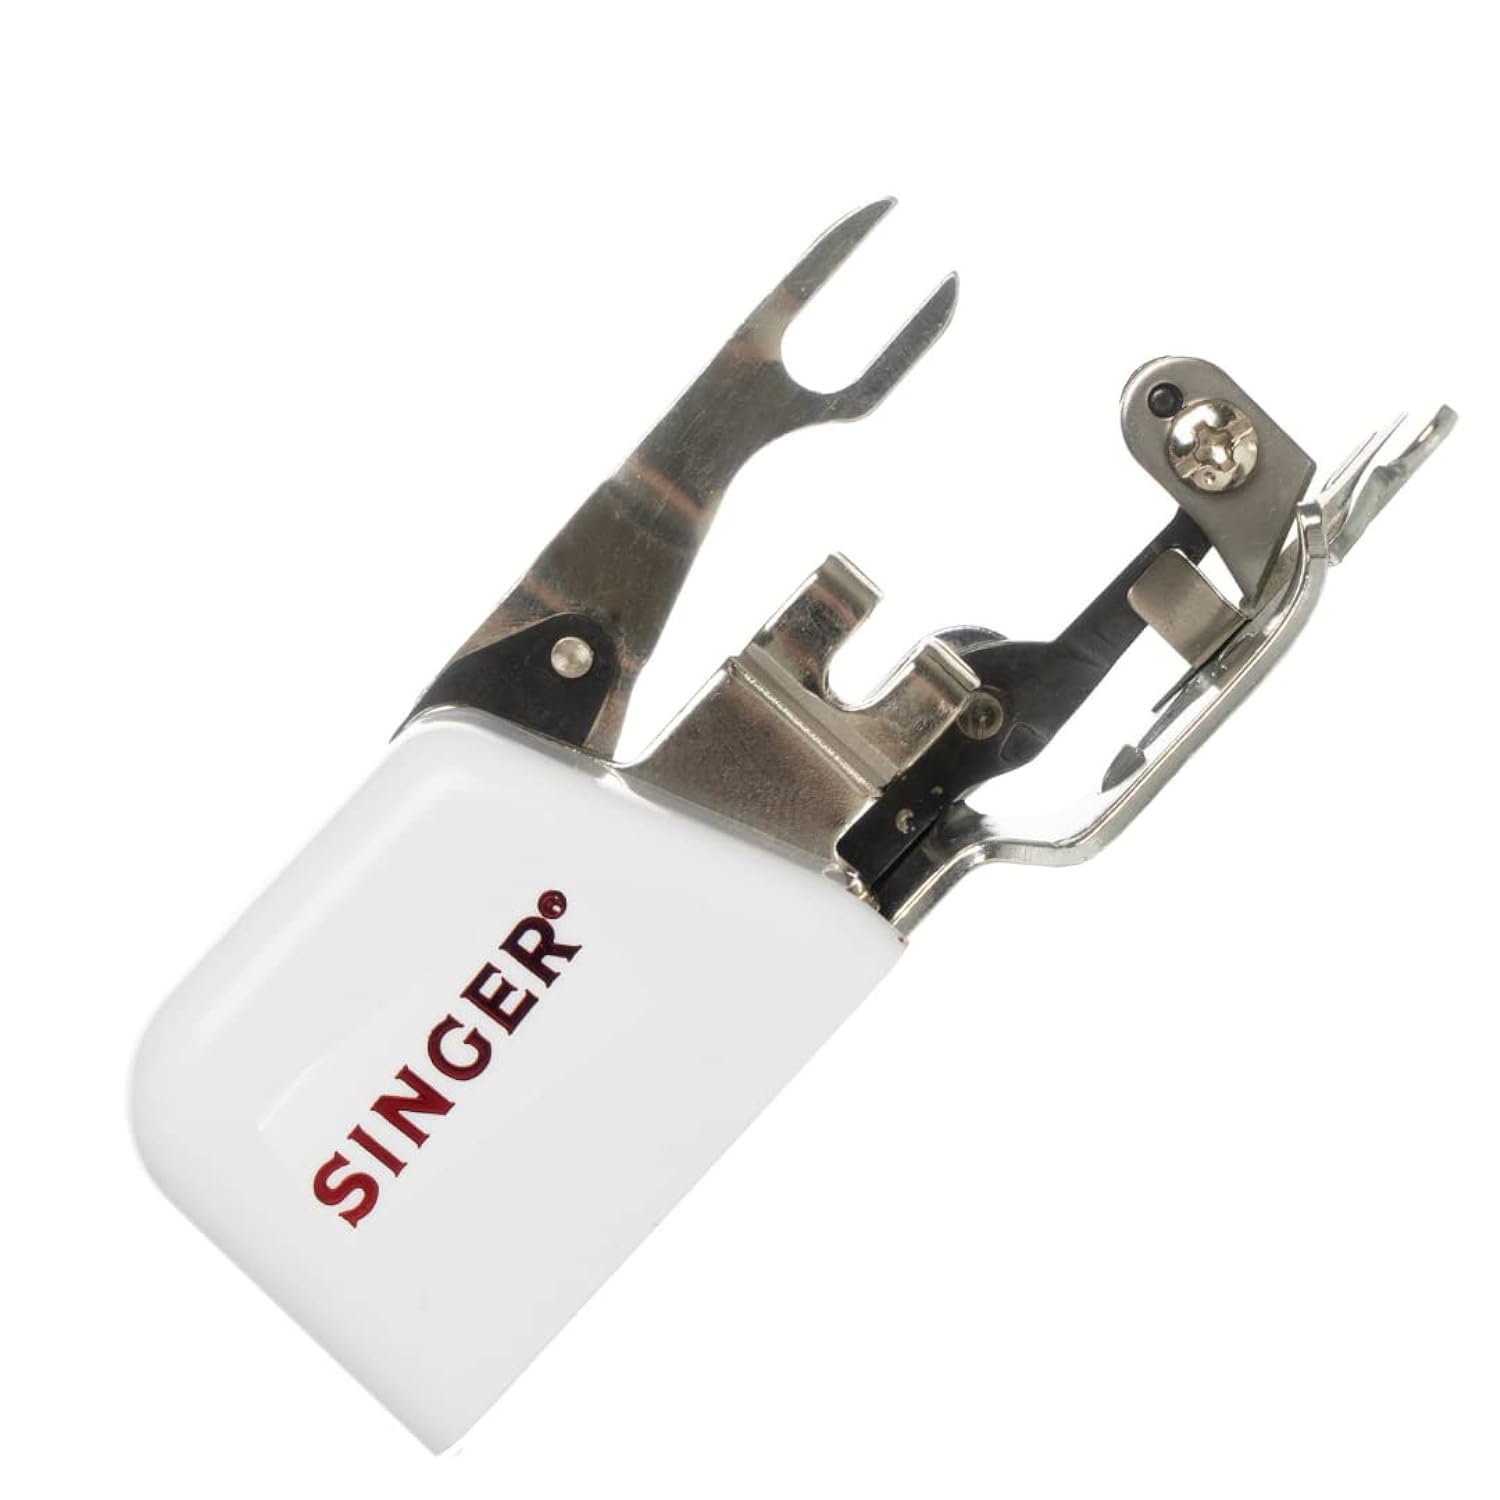 SINGER | Side Cutter Attachment Presser Foot, Simutaneously Trims & Hems Edges, Zig-Zag or Overstitch - Sewing Made Easy